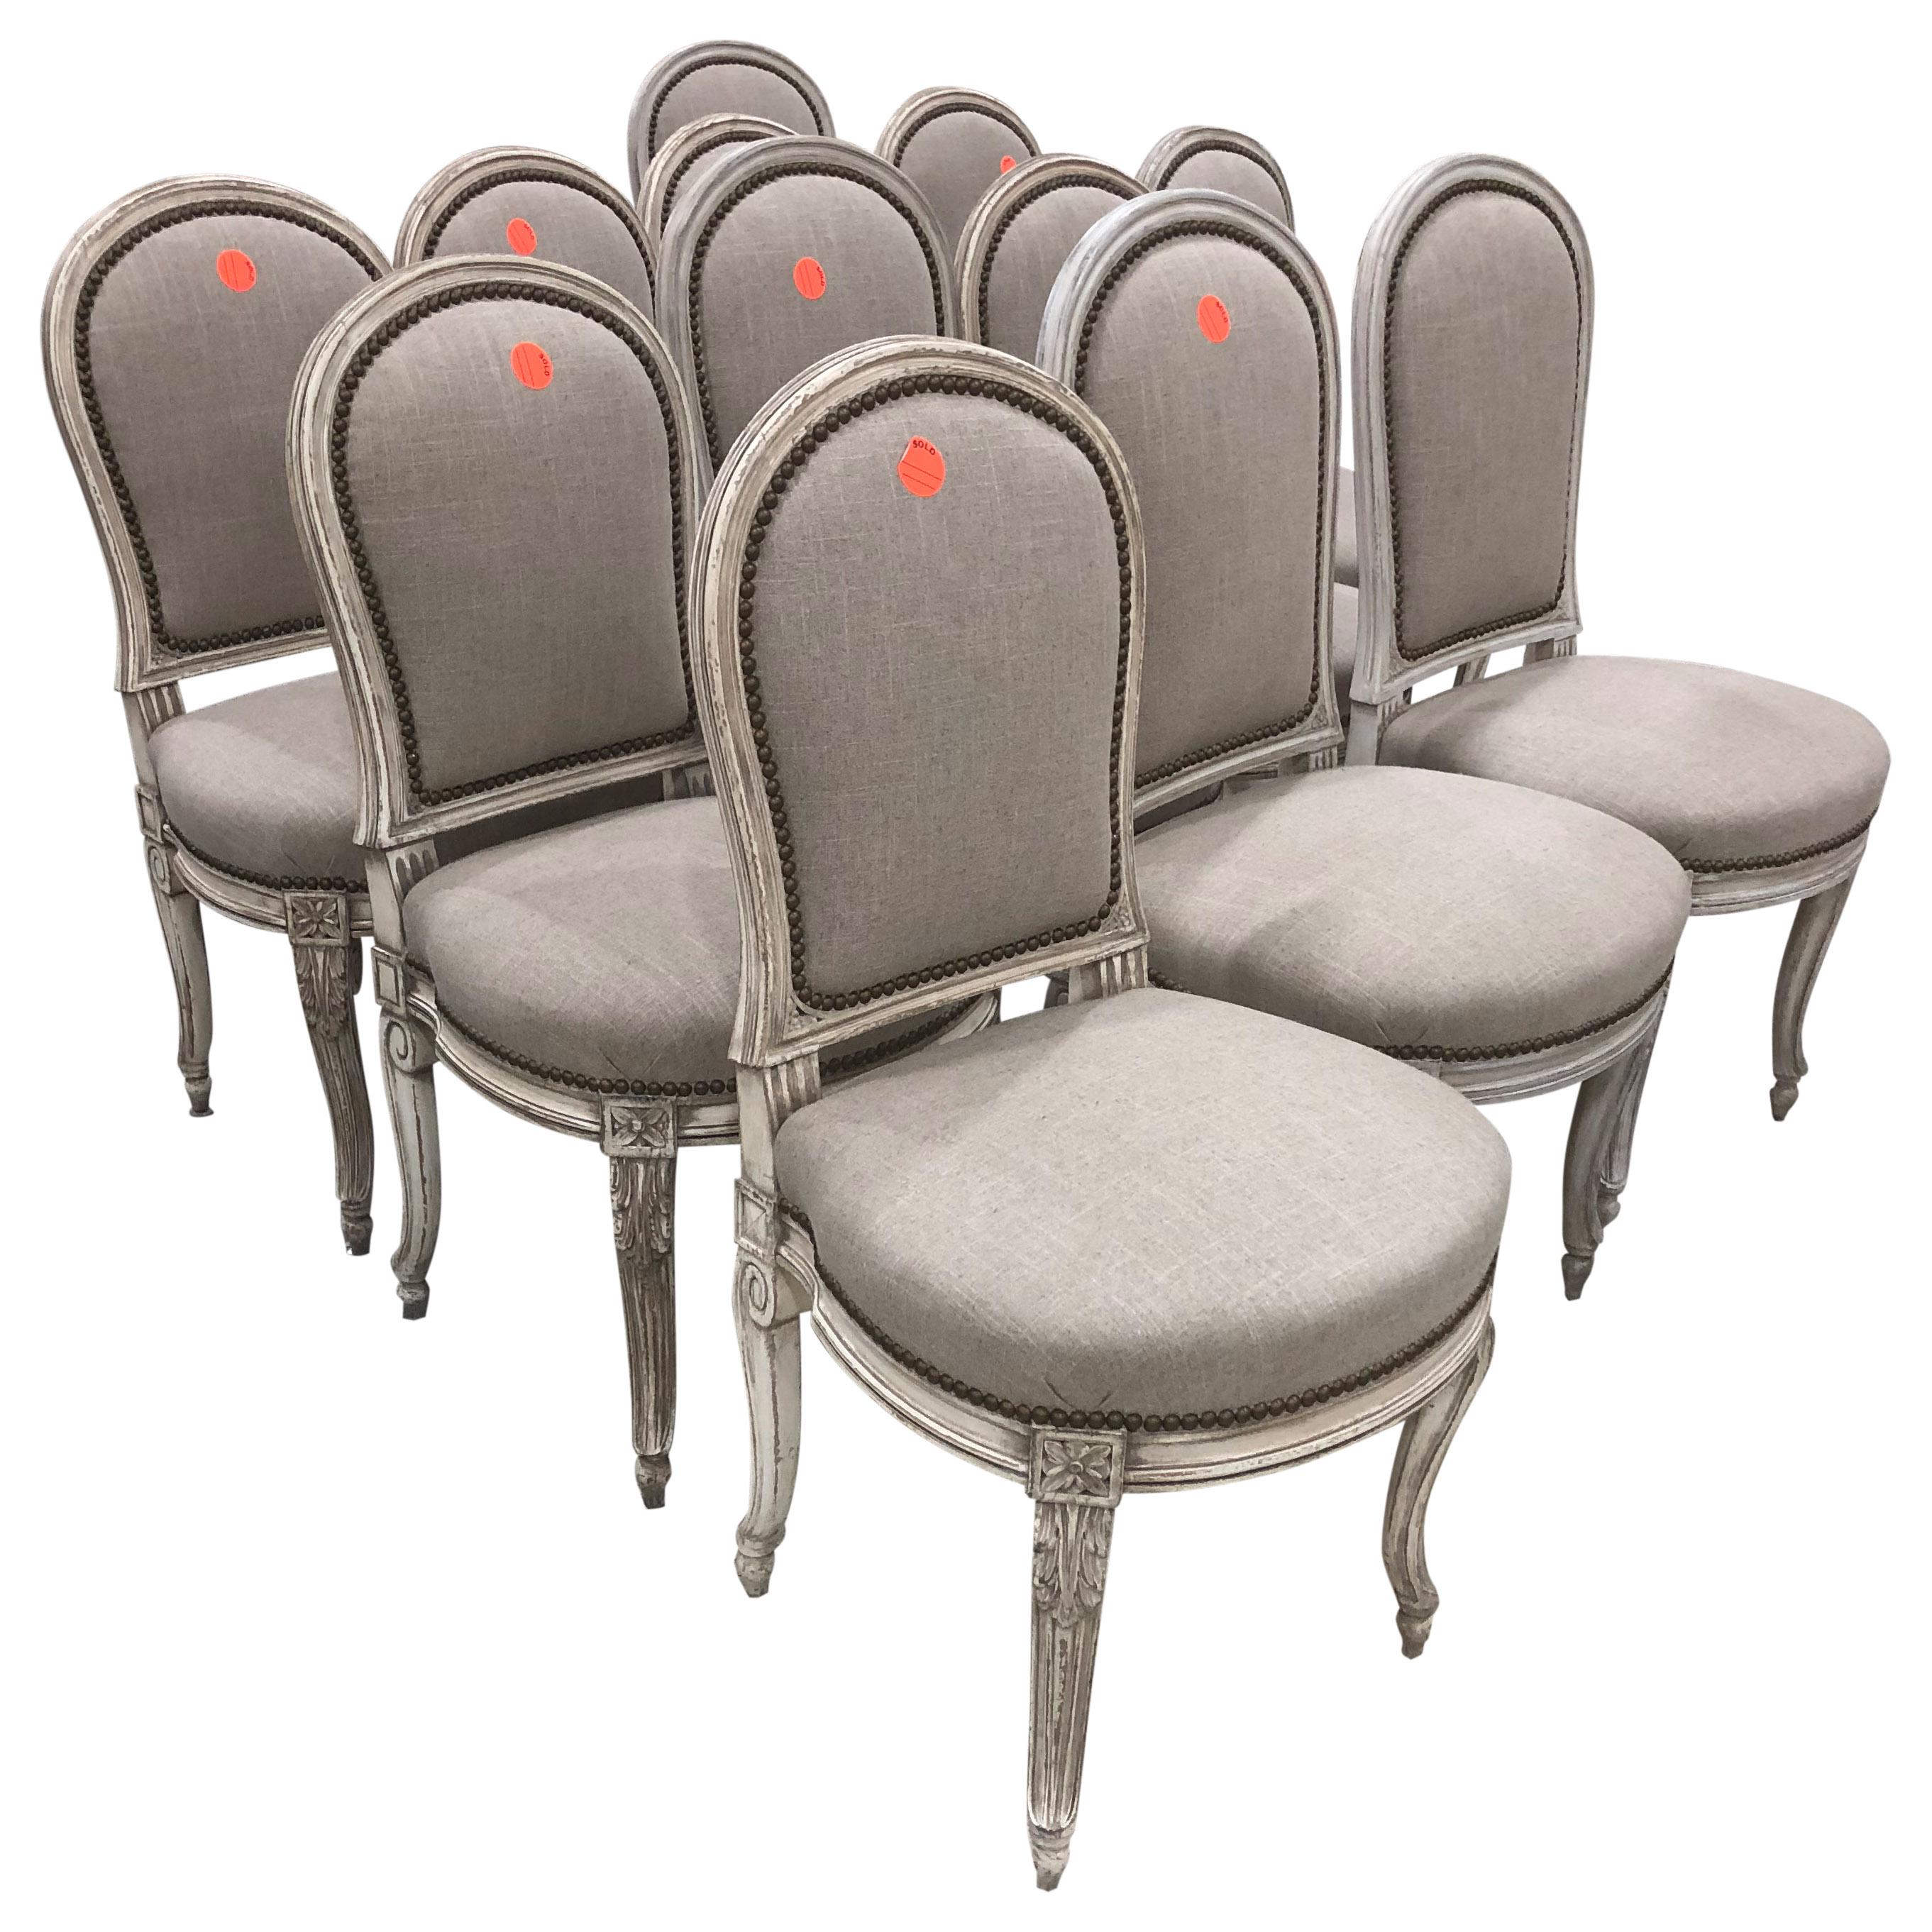 Set of 12 French Regency Style Chairs For Sale